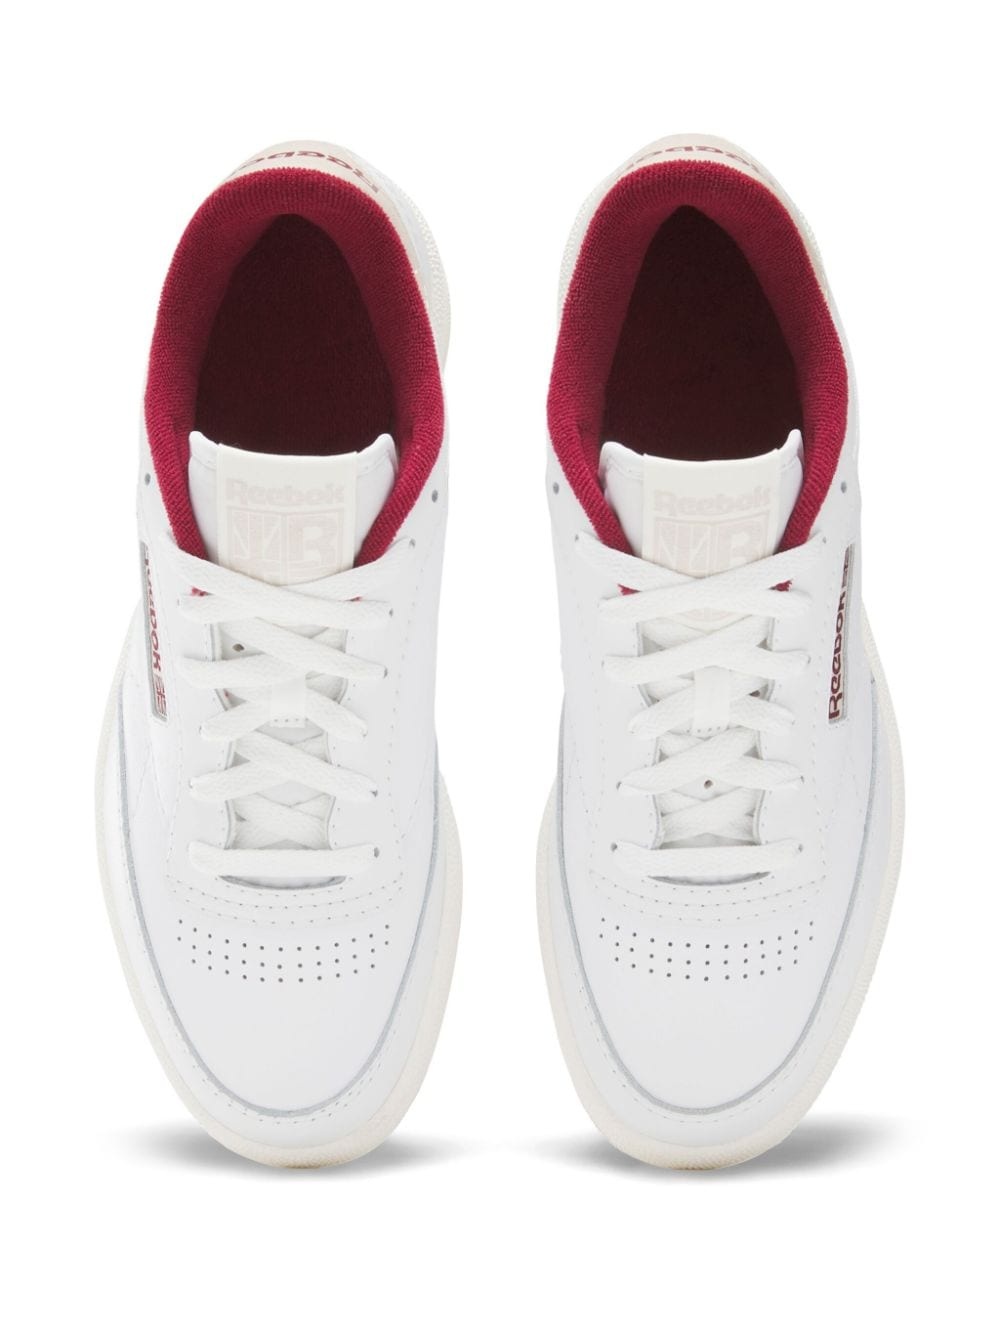 Club C 85 leather sneakers - 5